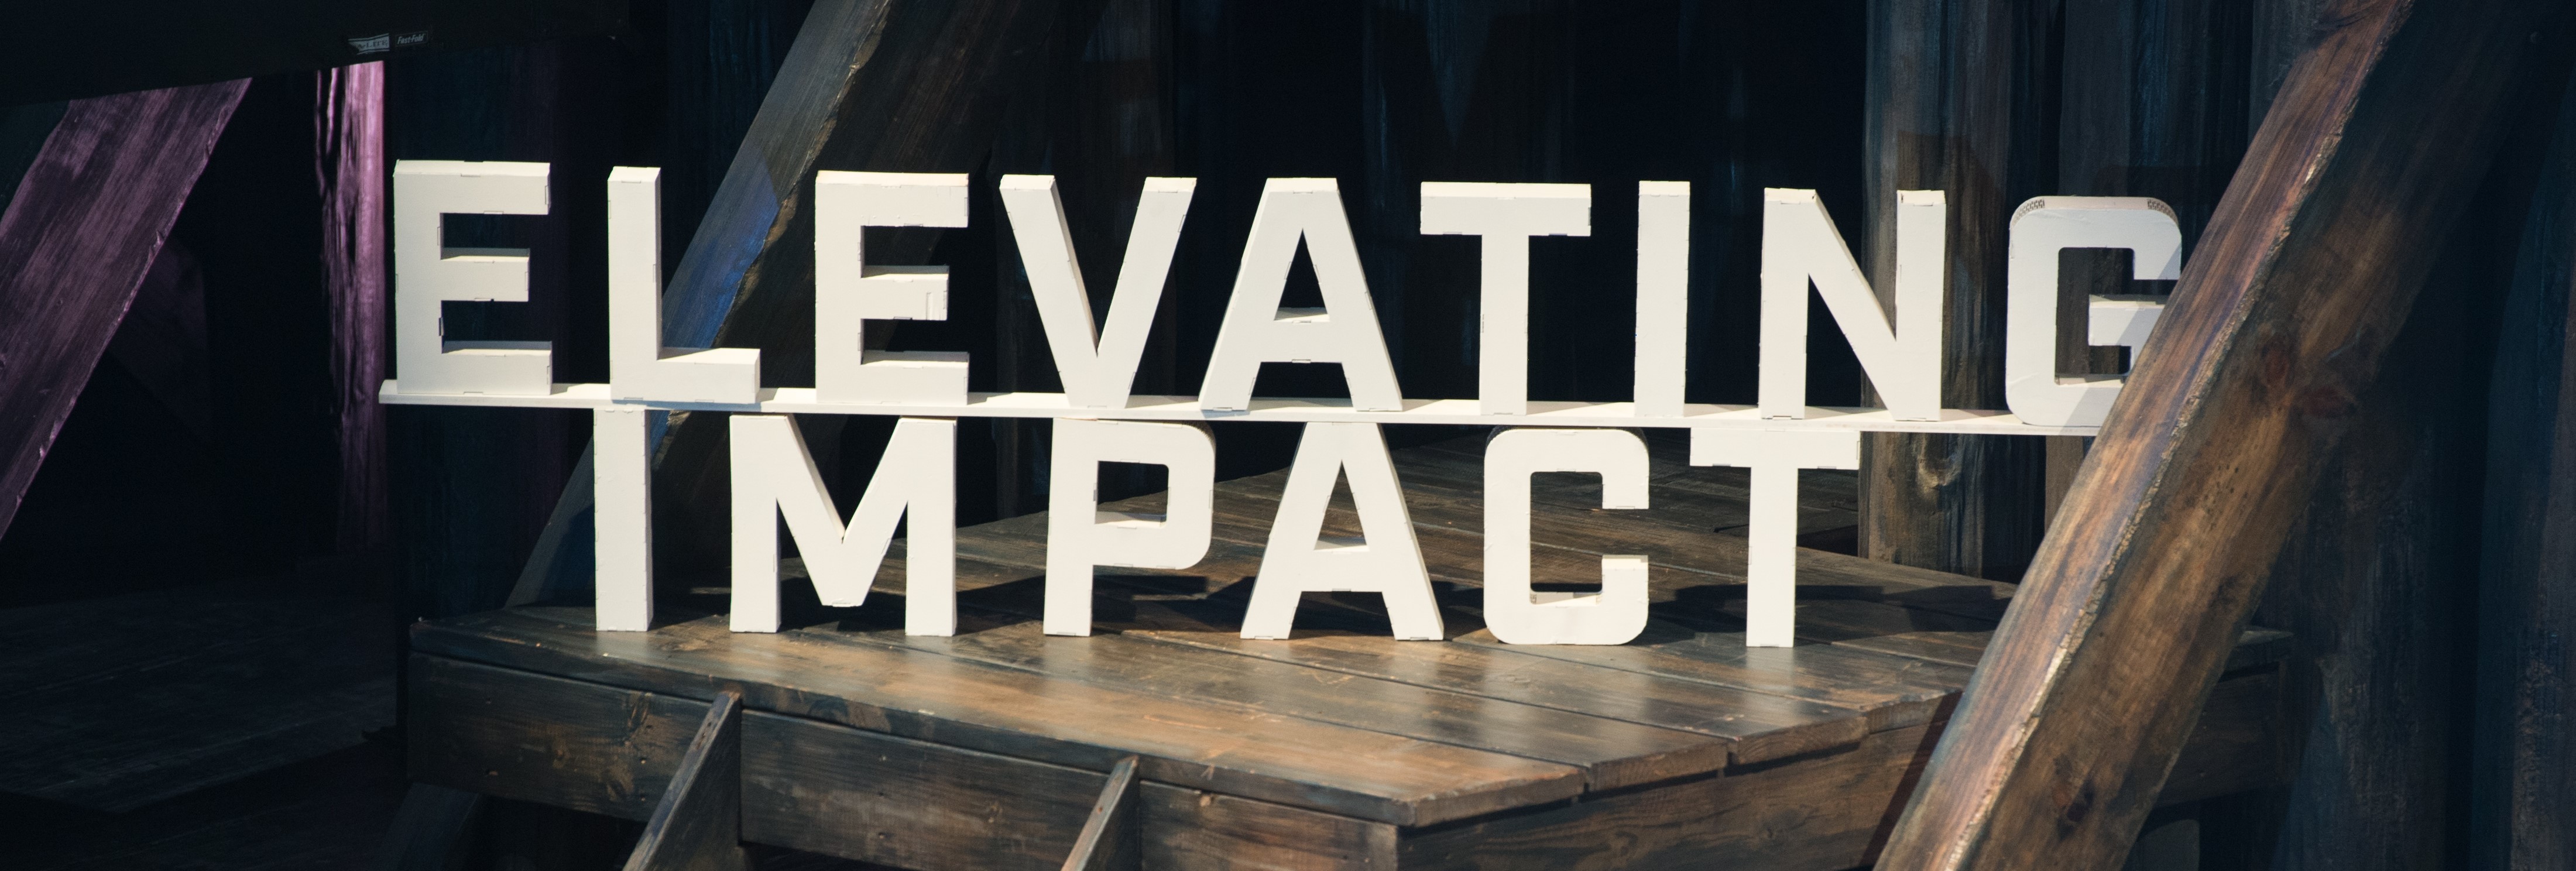 Elevating Impact 3D sign 